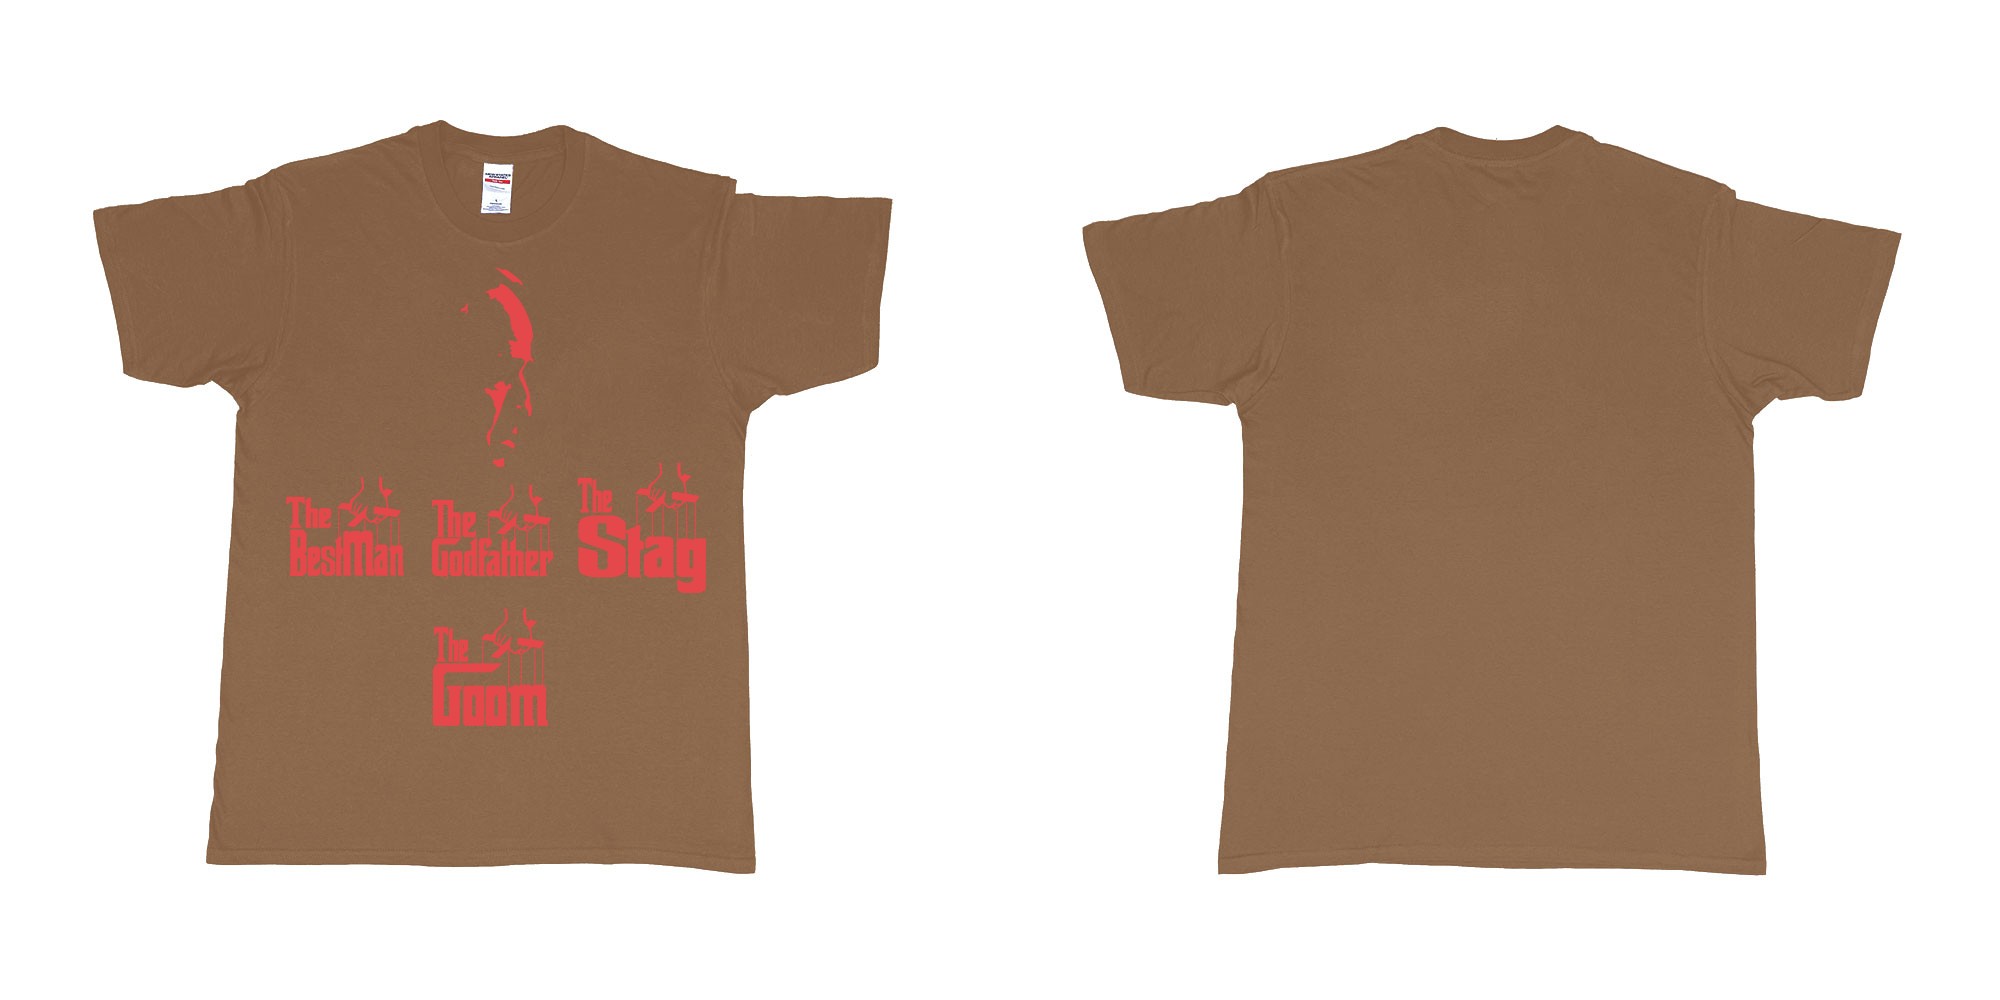 Custom tshirt design TPW the godfather in fabric color chestnut choice your own text made in Bali by The Pirate Way